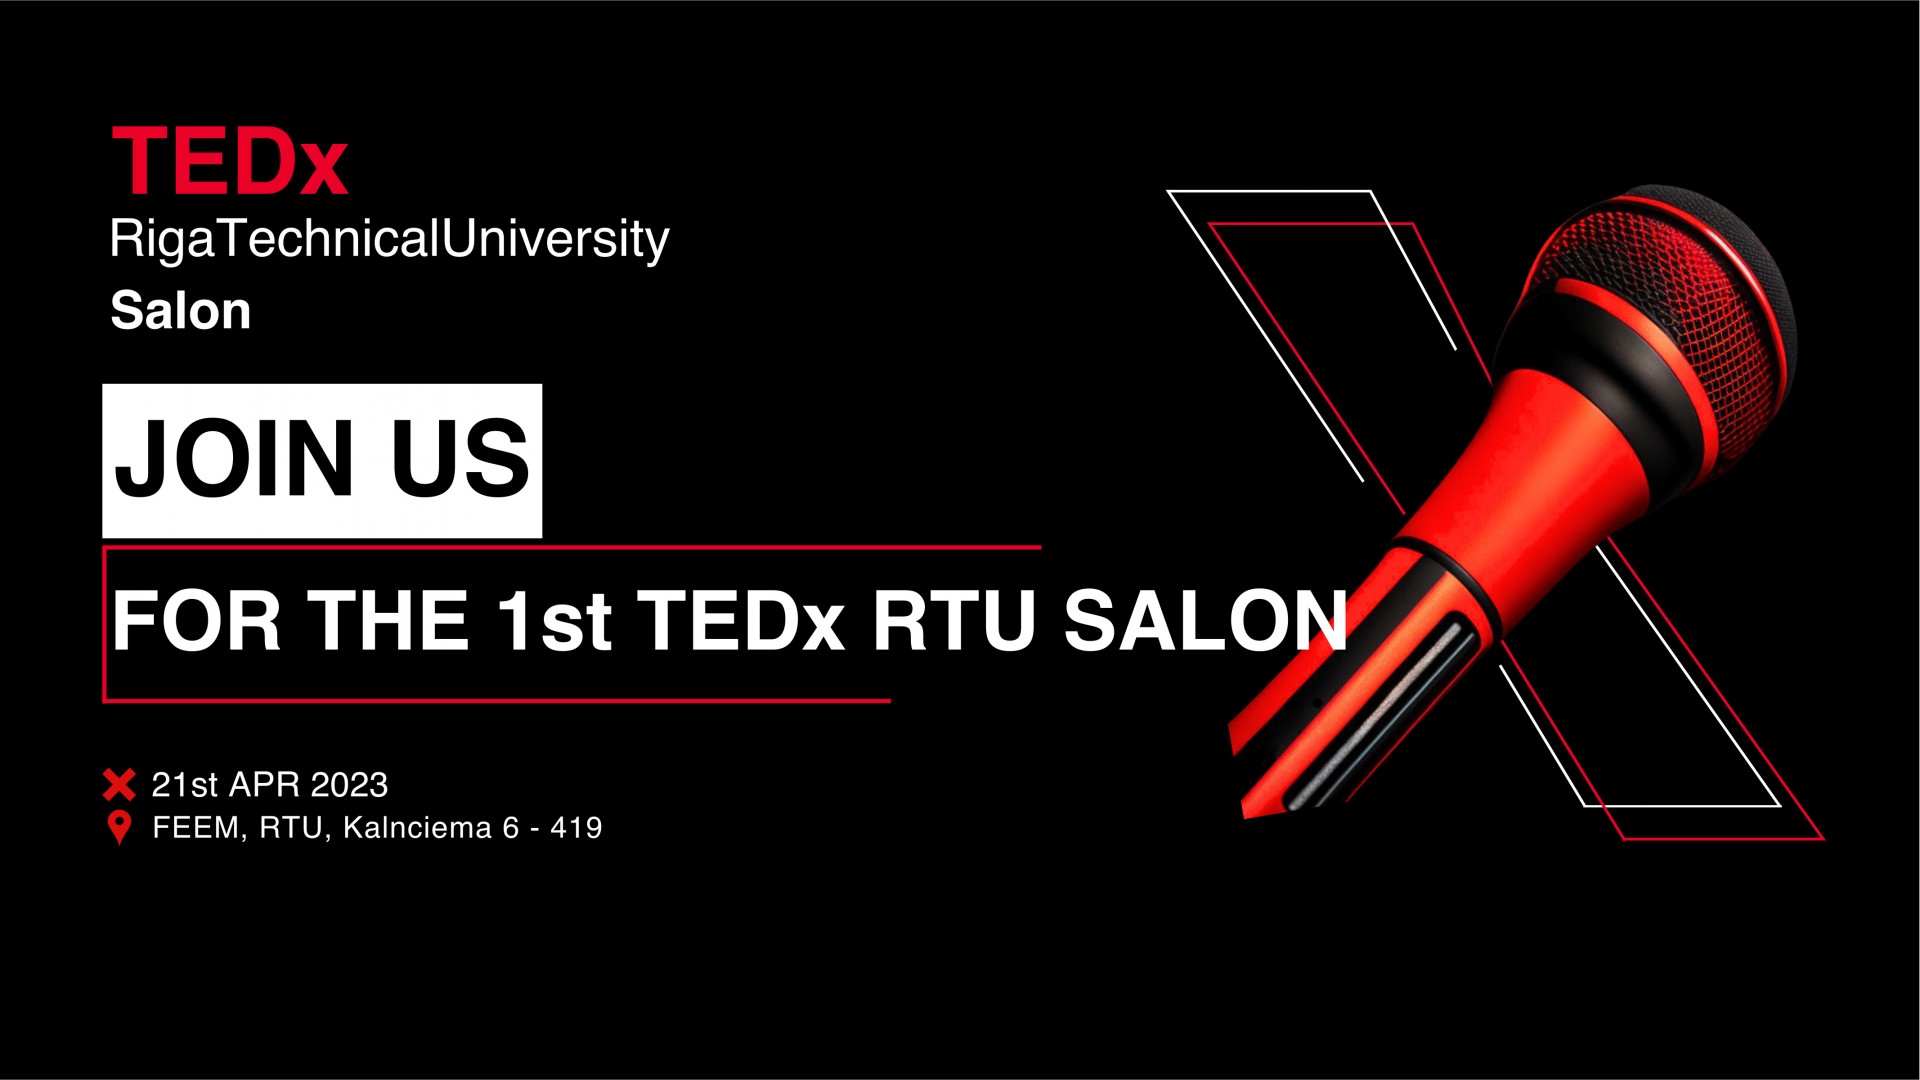 The first TEDx RigaTechnicalUniversity Salon event will take place on April 21